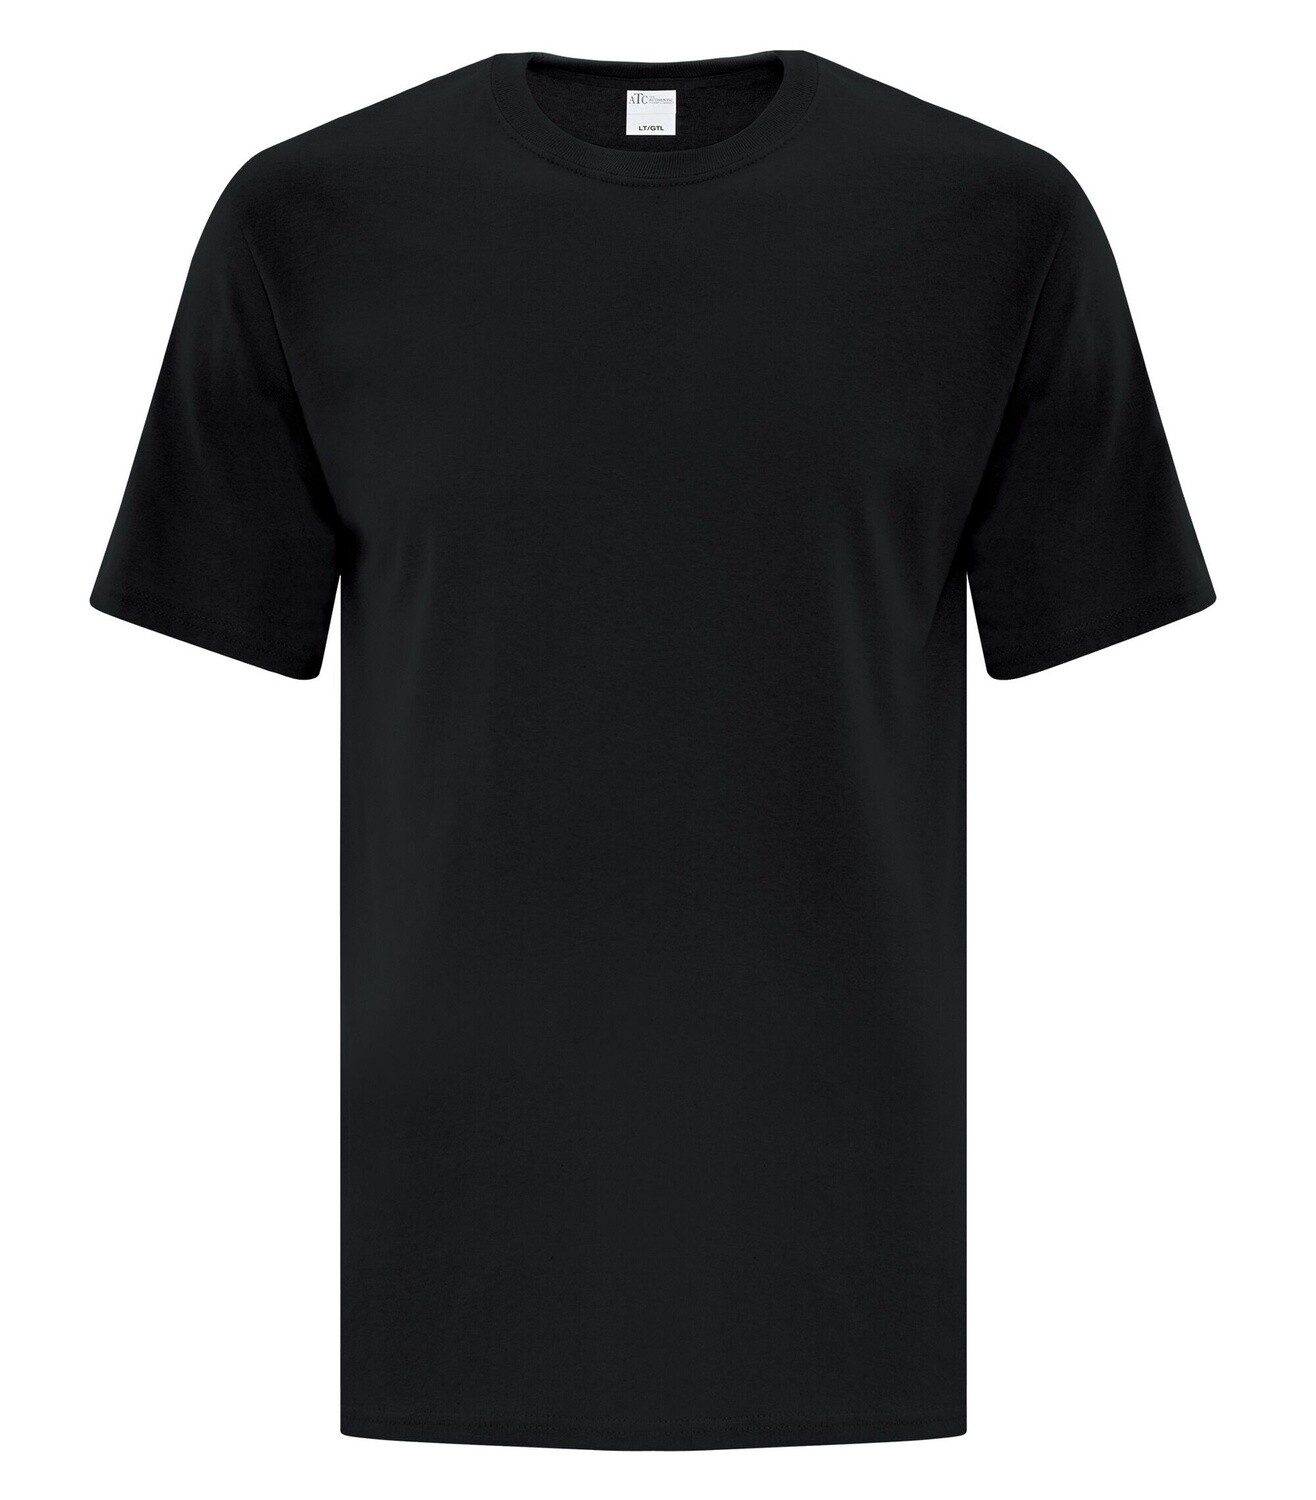 ATC Everyday Cotton Tall Tee, Size: Large, Colour: Black